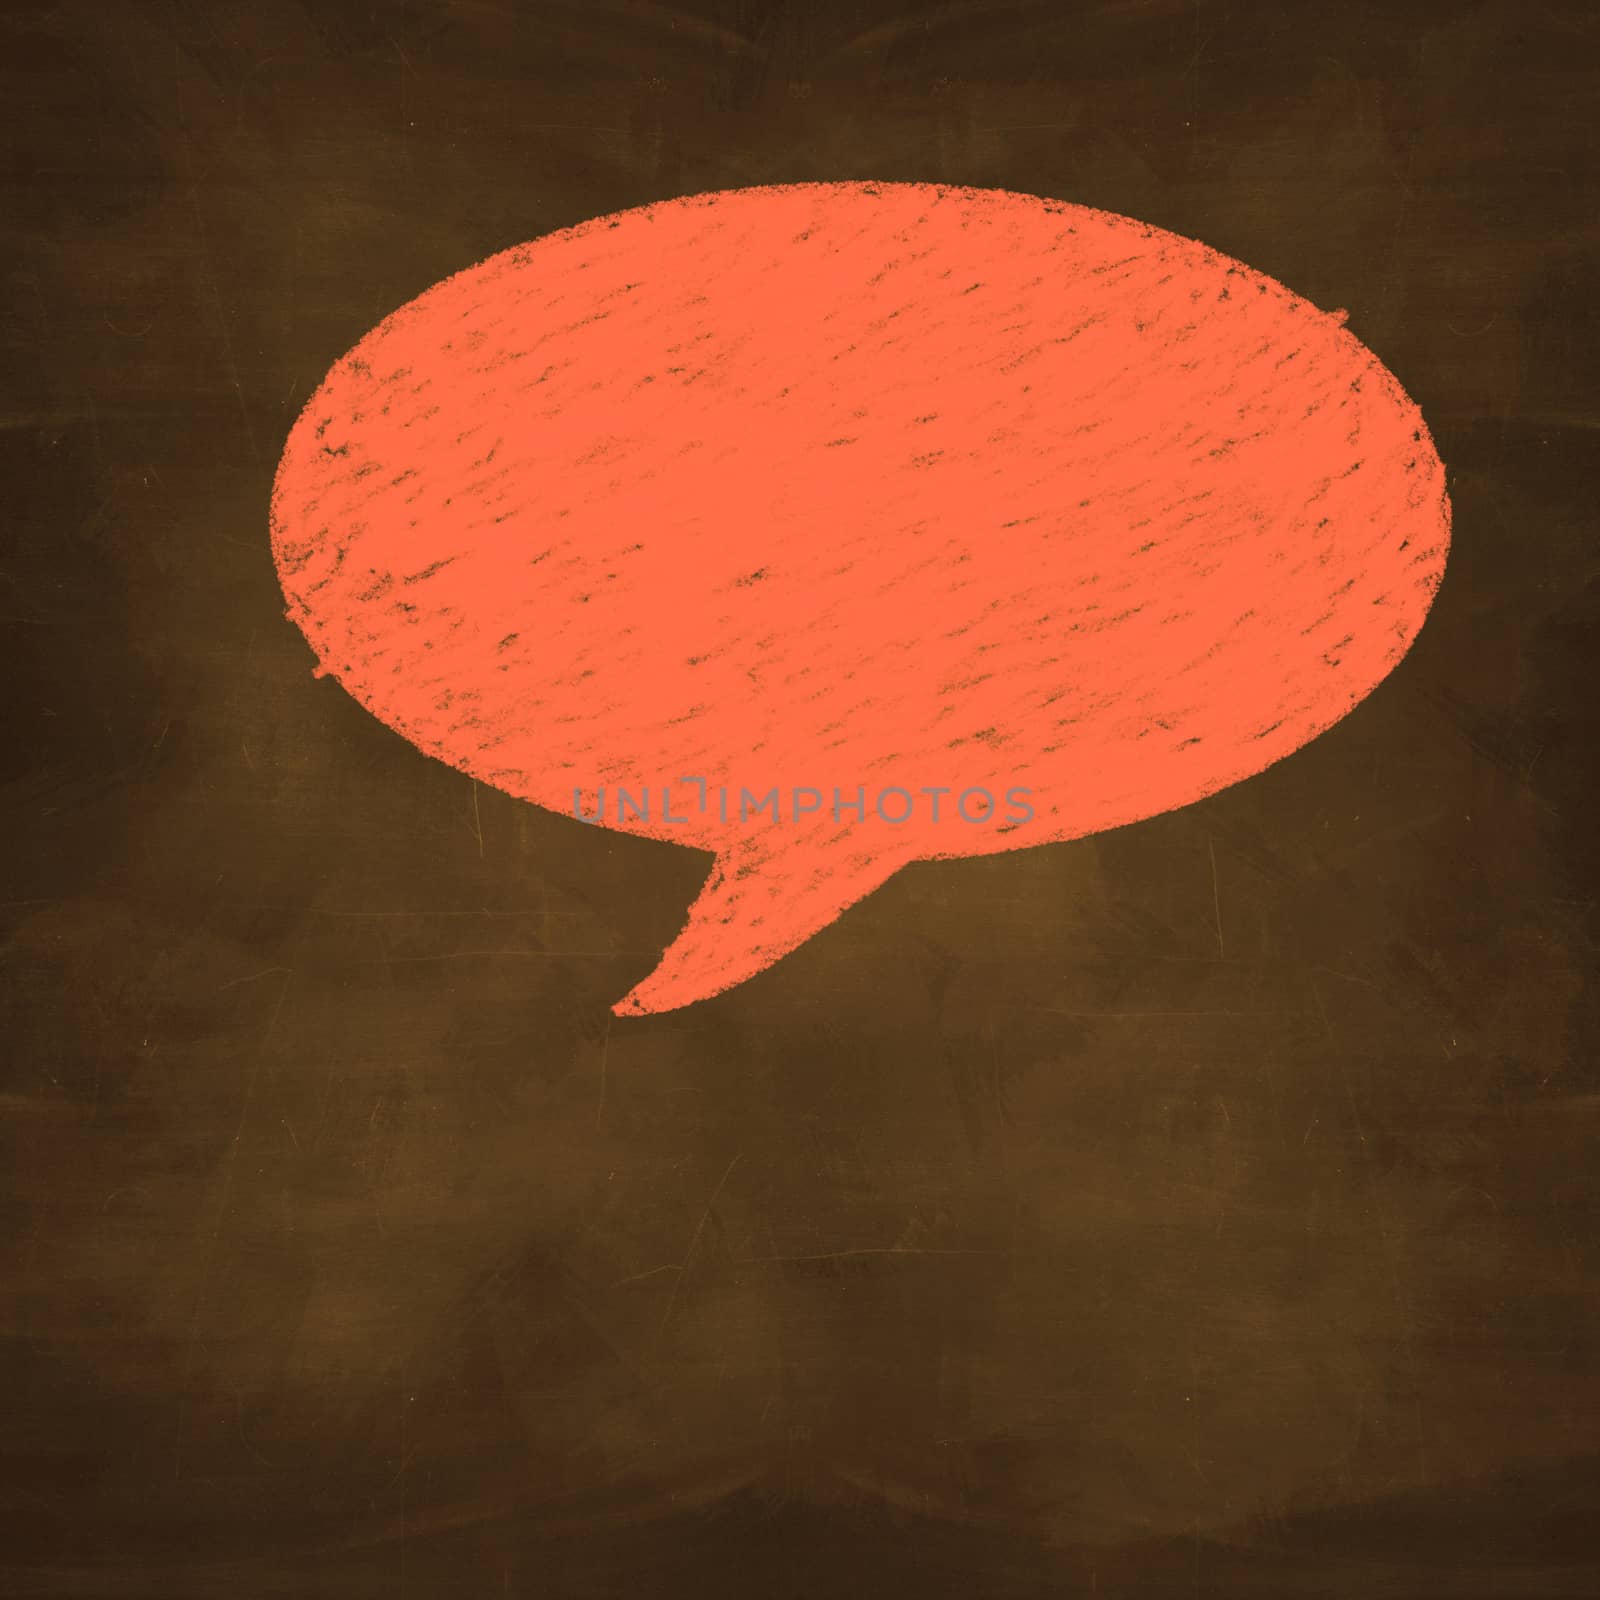 hand drawn chalked speech bubble on background